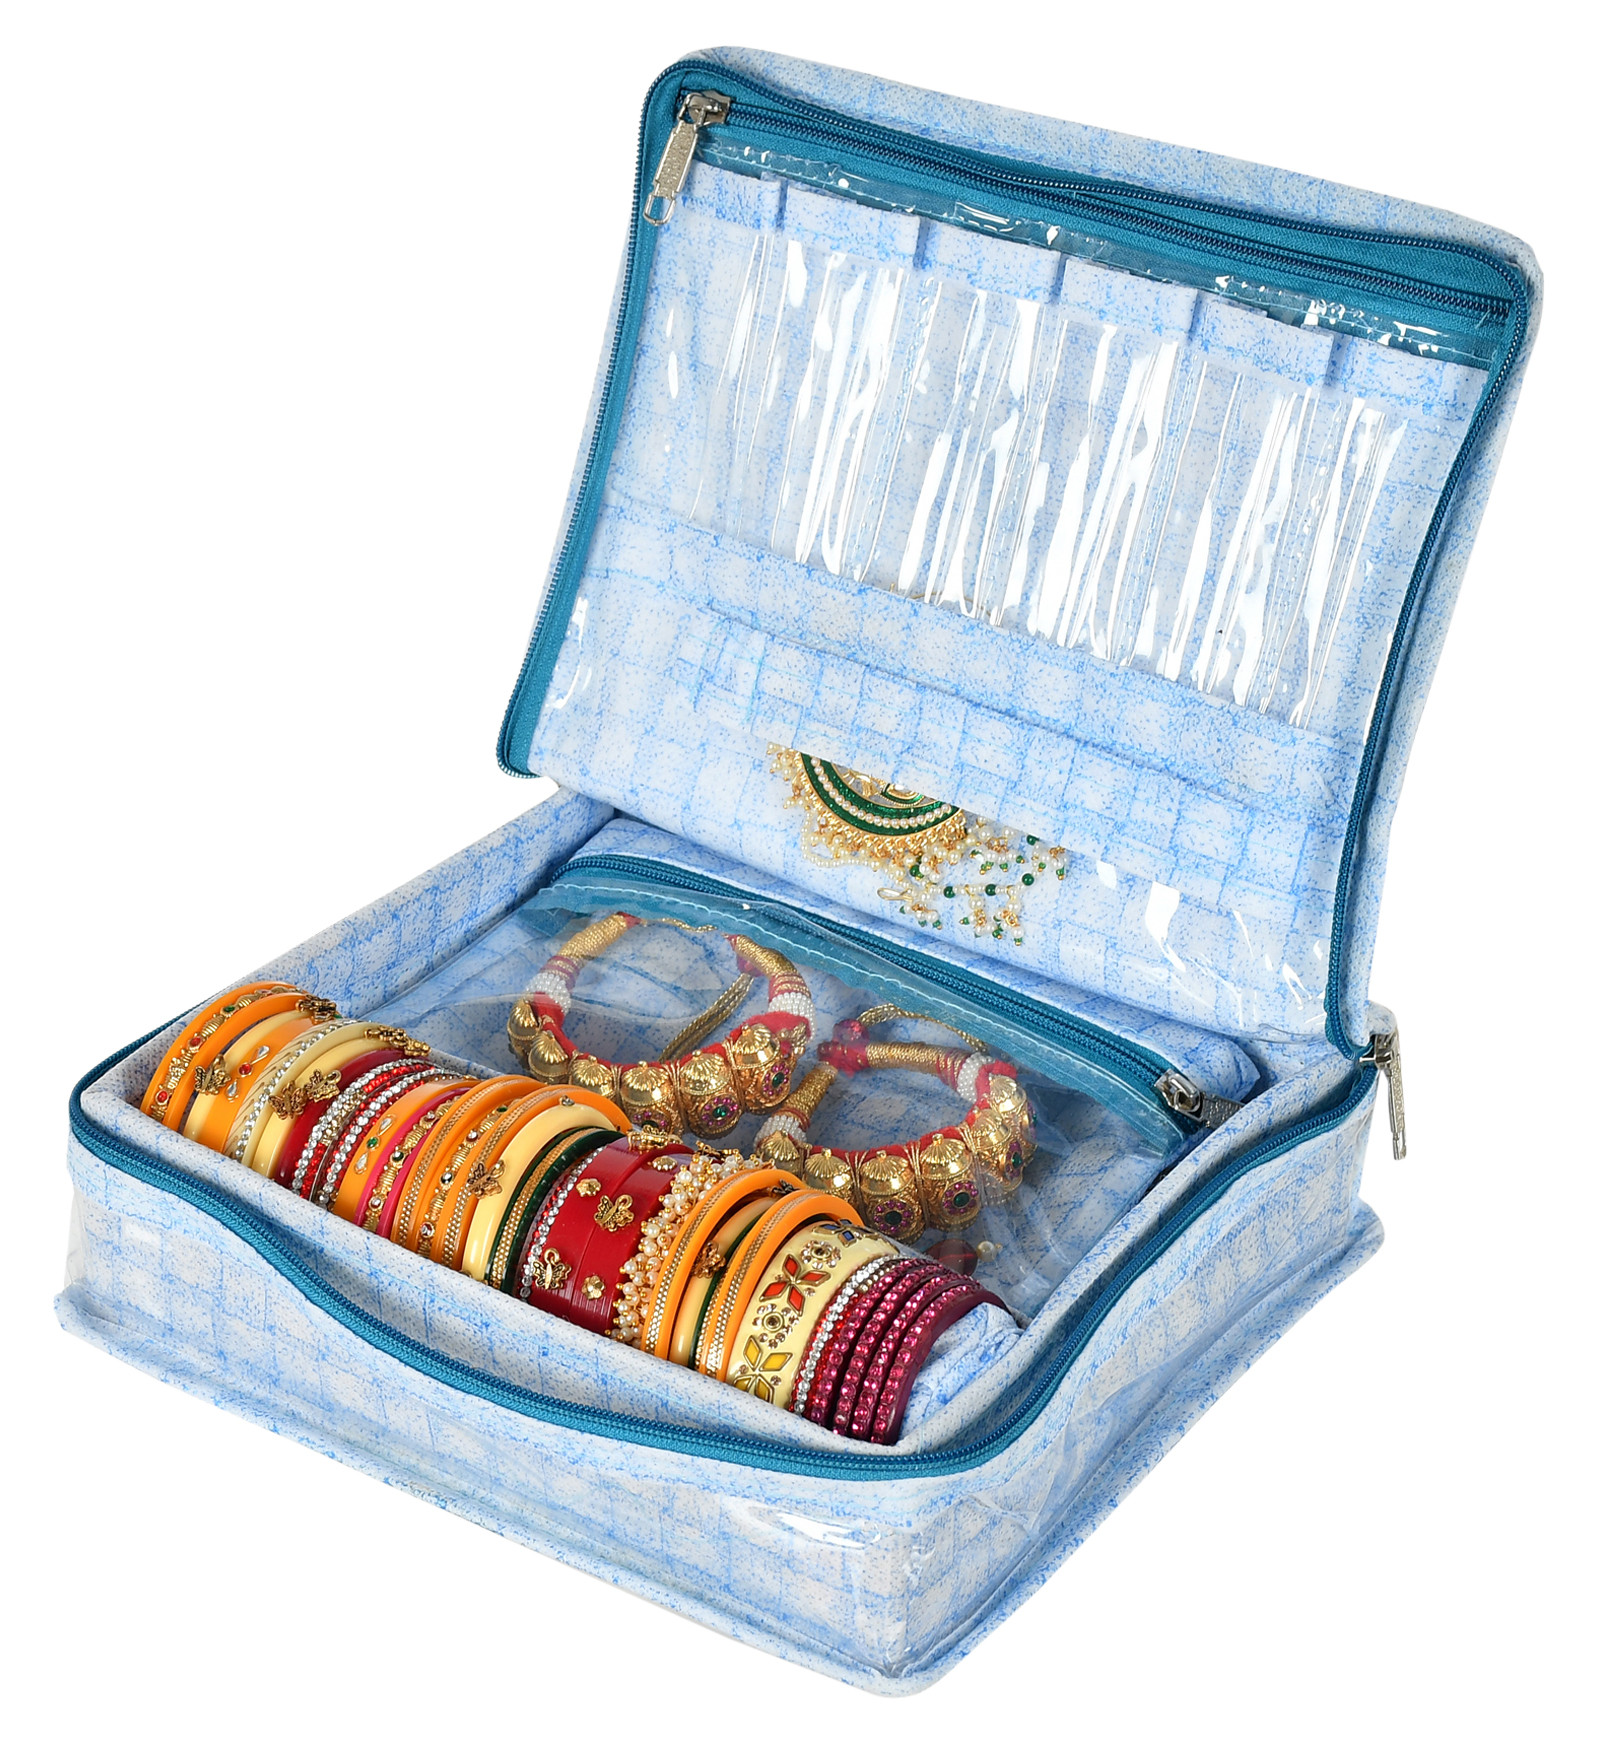 Kuber Industries Check Design Laminated PVC Jewellery Organizer With 4 Transparent Pouches & 1 Bangle/Watch Rod For Keeps Your Jewellery,Earrings, Necklaces Organized And Secure (Blue)-HS_38_KUBMART21273